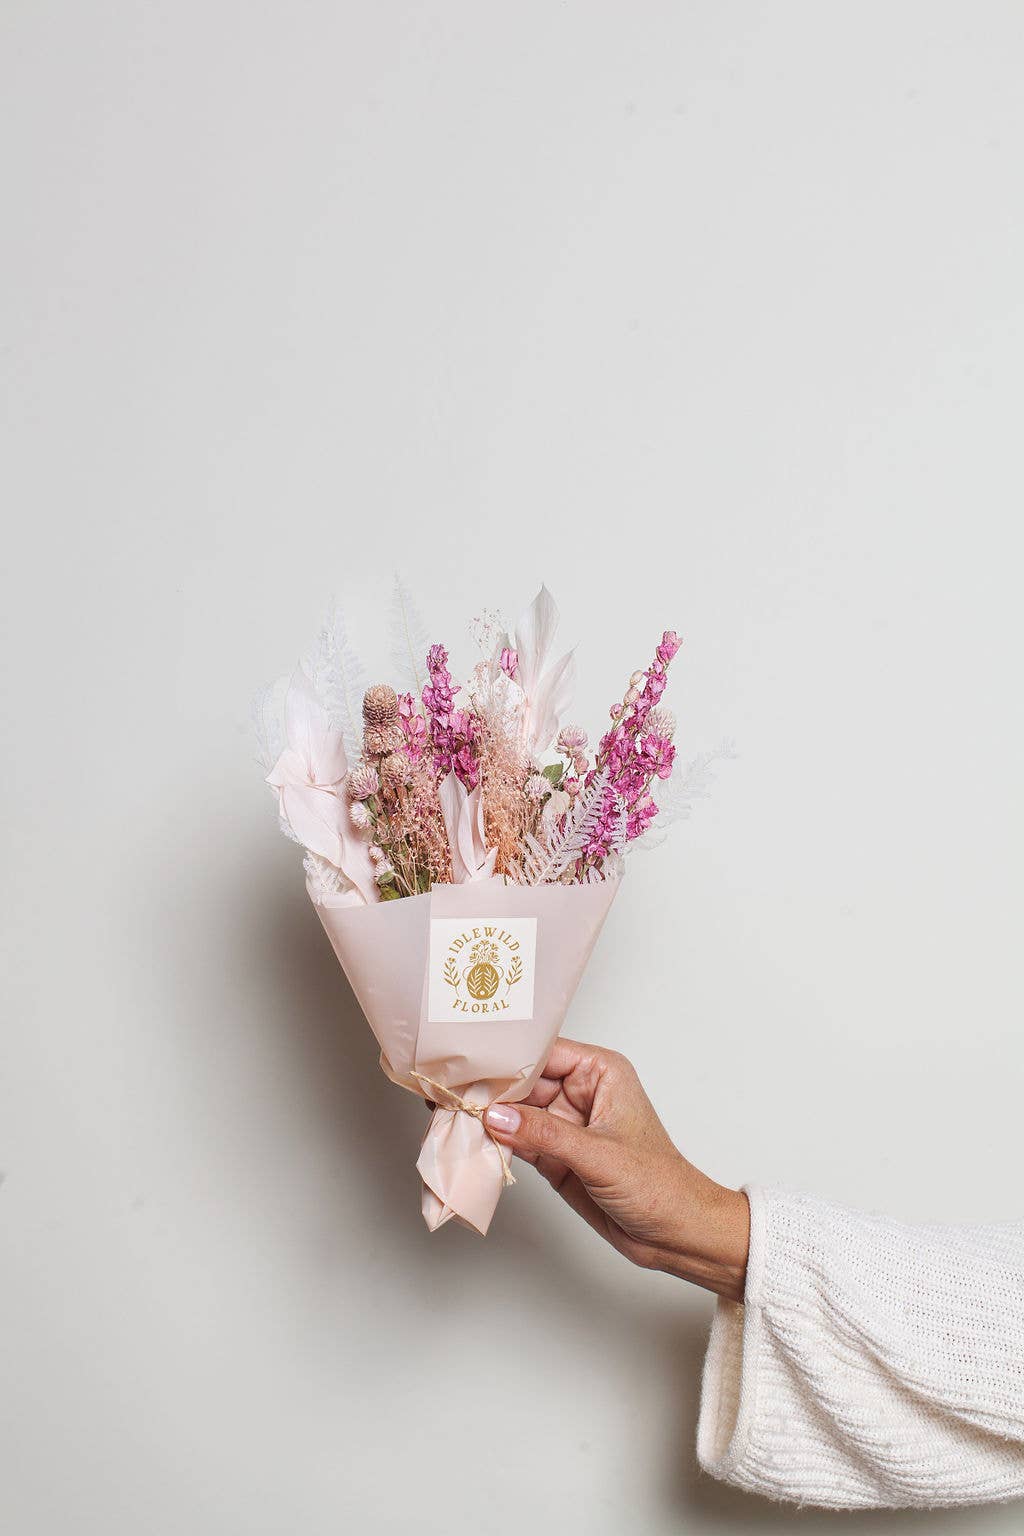 Idlewild Floral Co. - The Sweetheart Bouquet Petite - Eventide Botanical Wellness